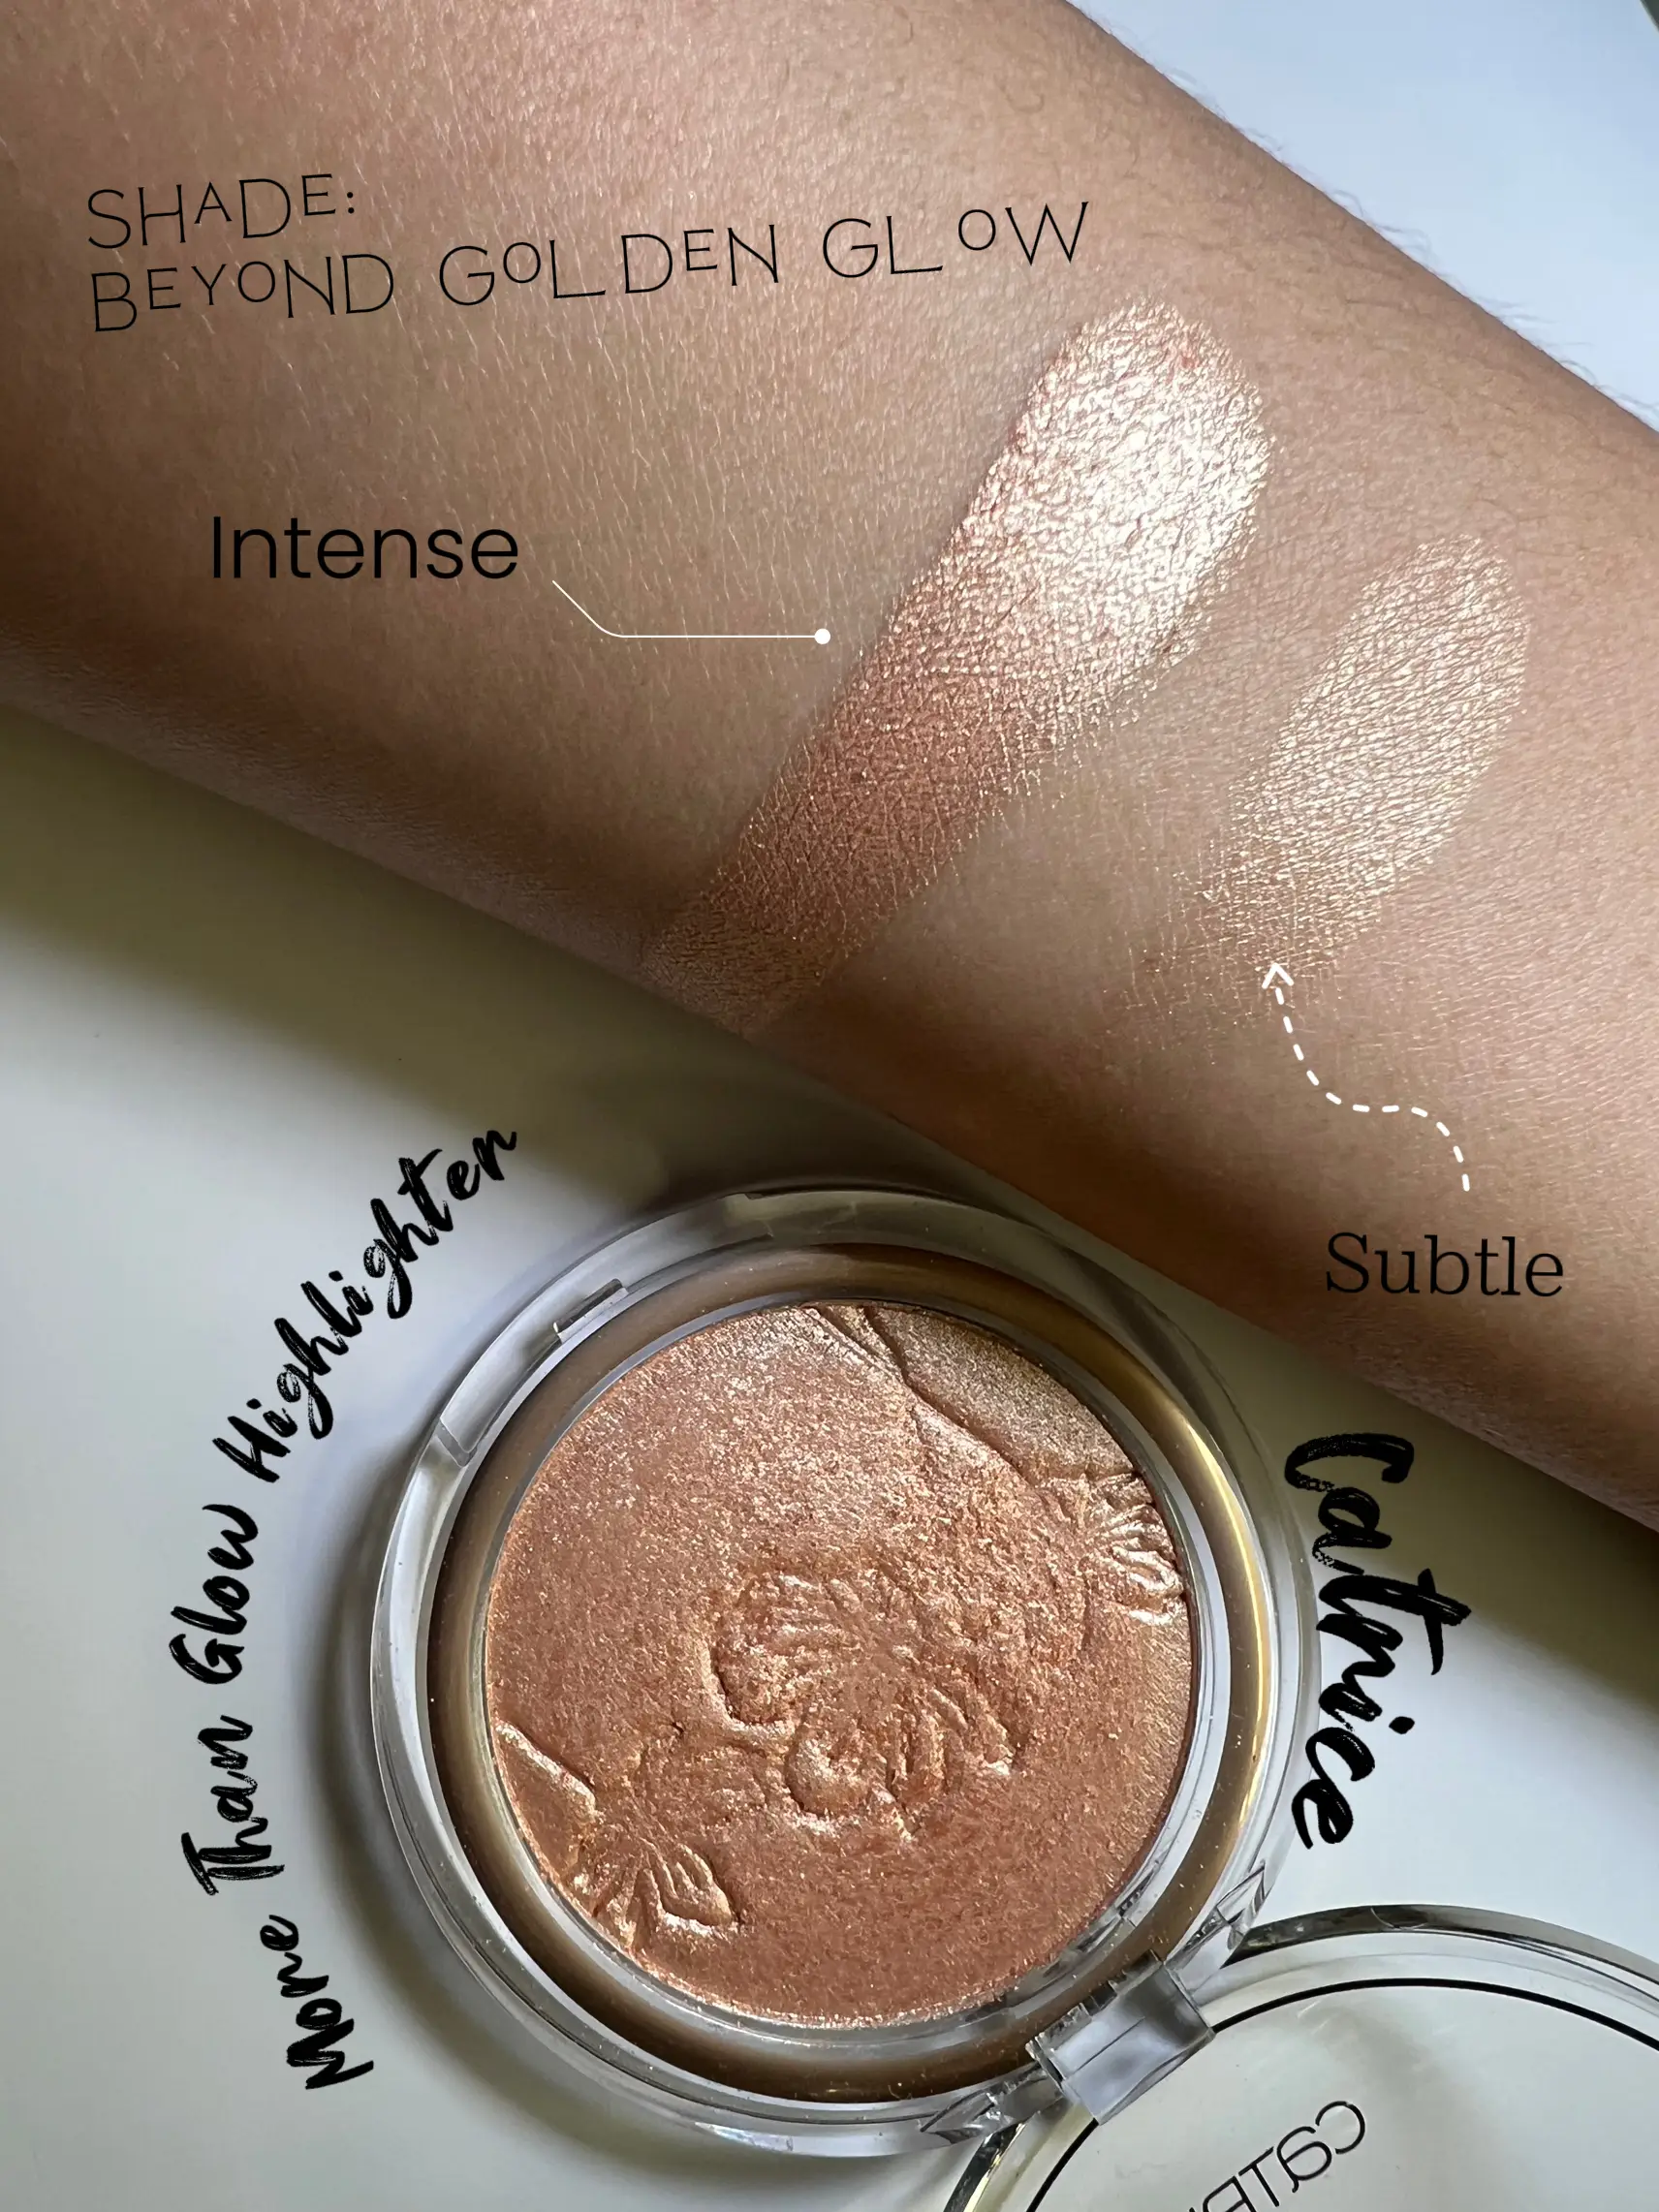 Liquid a by gives Gallery | posted | Lemon8 Fathima Highlight Ali Effect that Powder